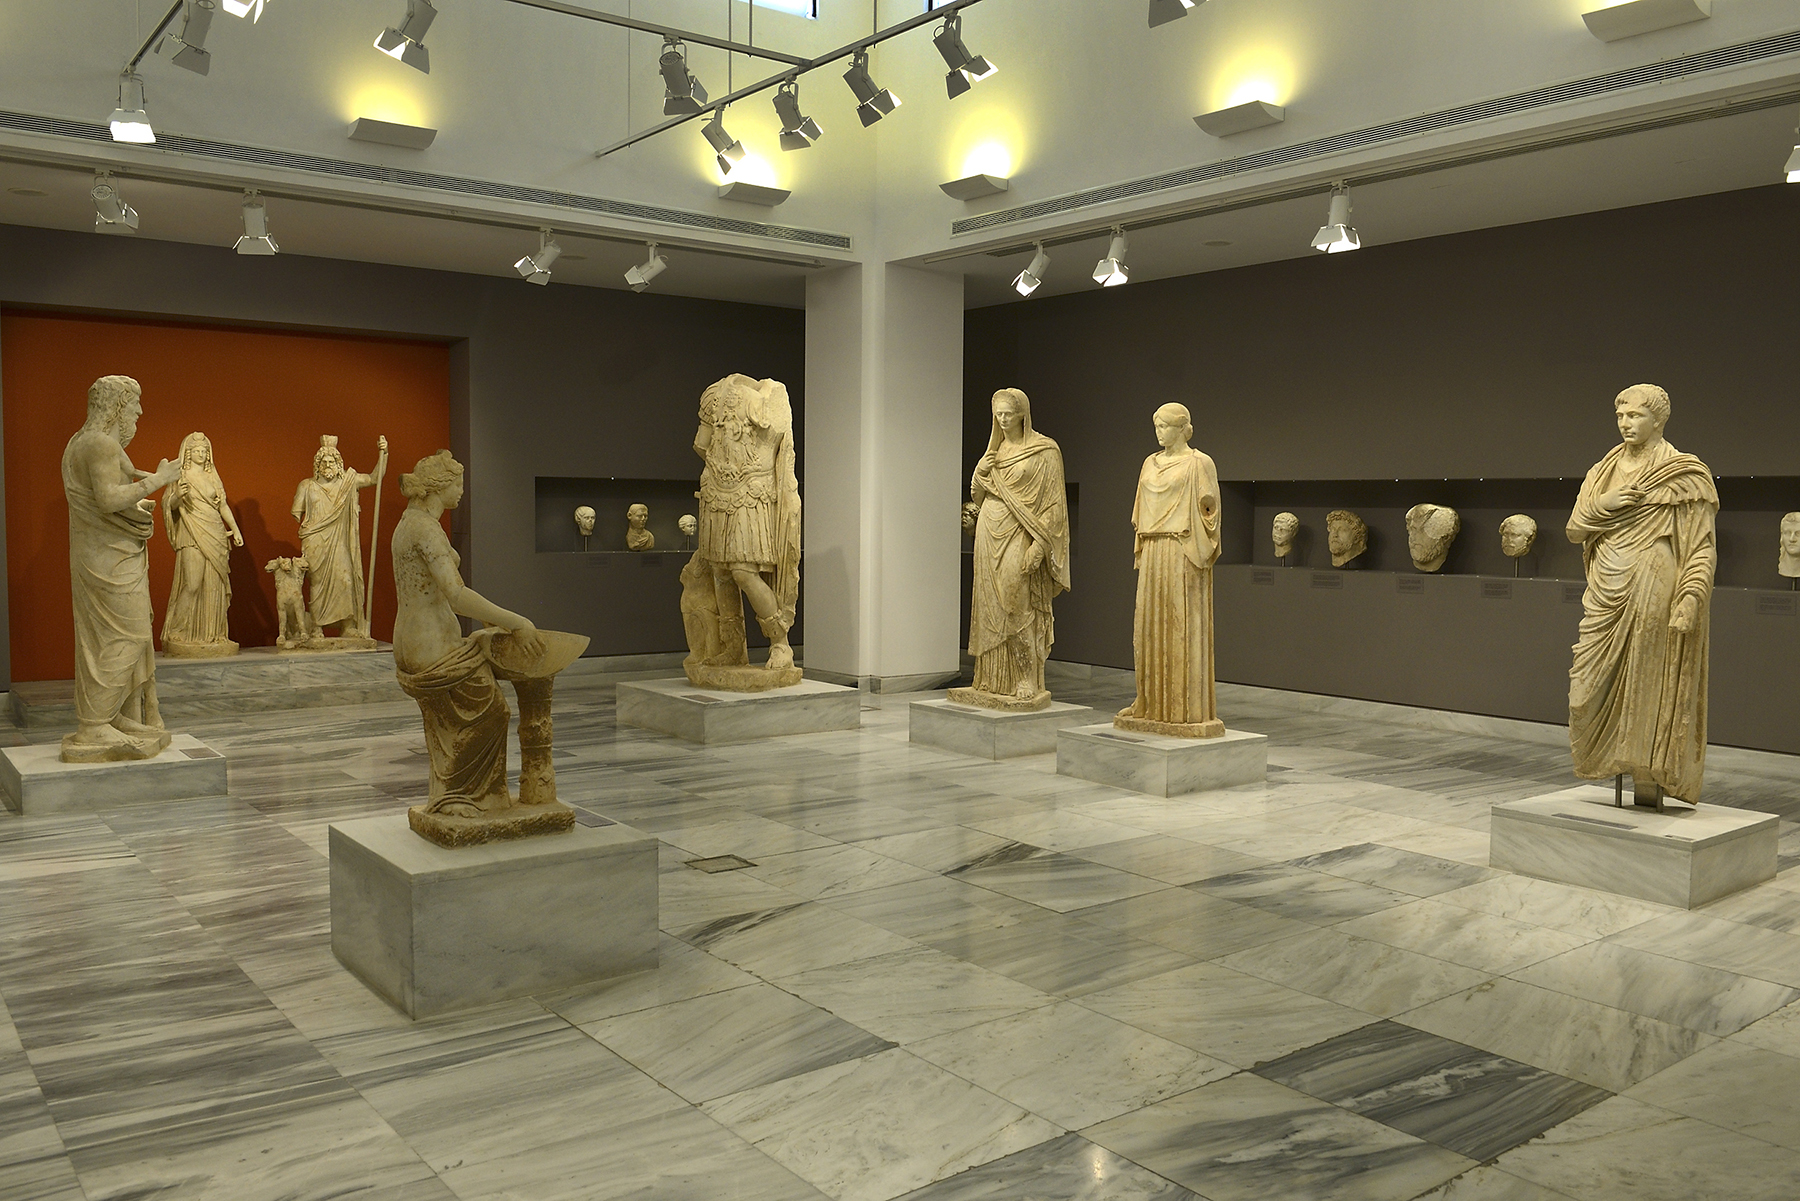 The Archaeological Museum of Heraklion: the ultimate museum of the Minoan Civilization